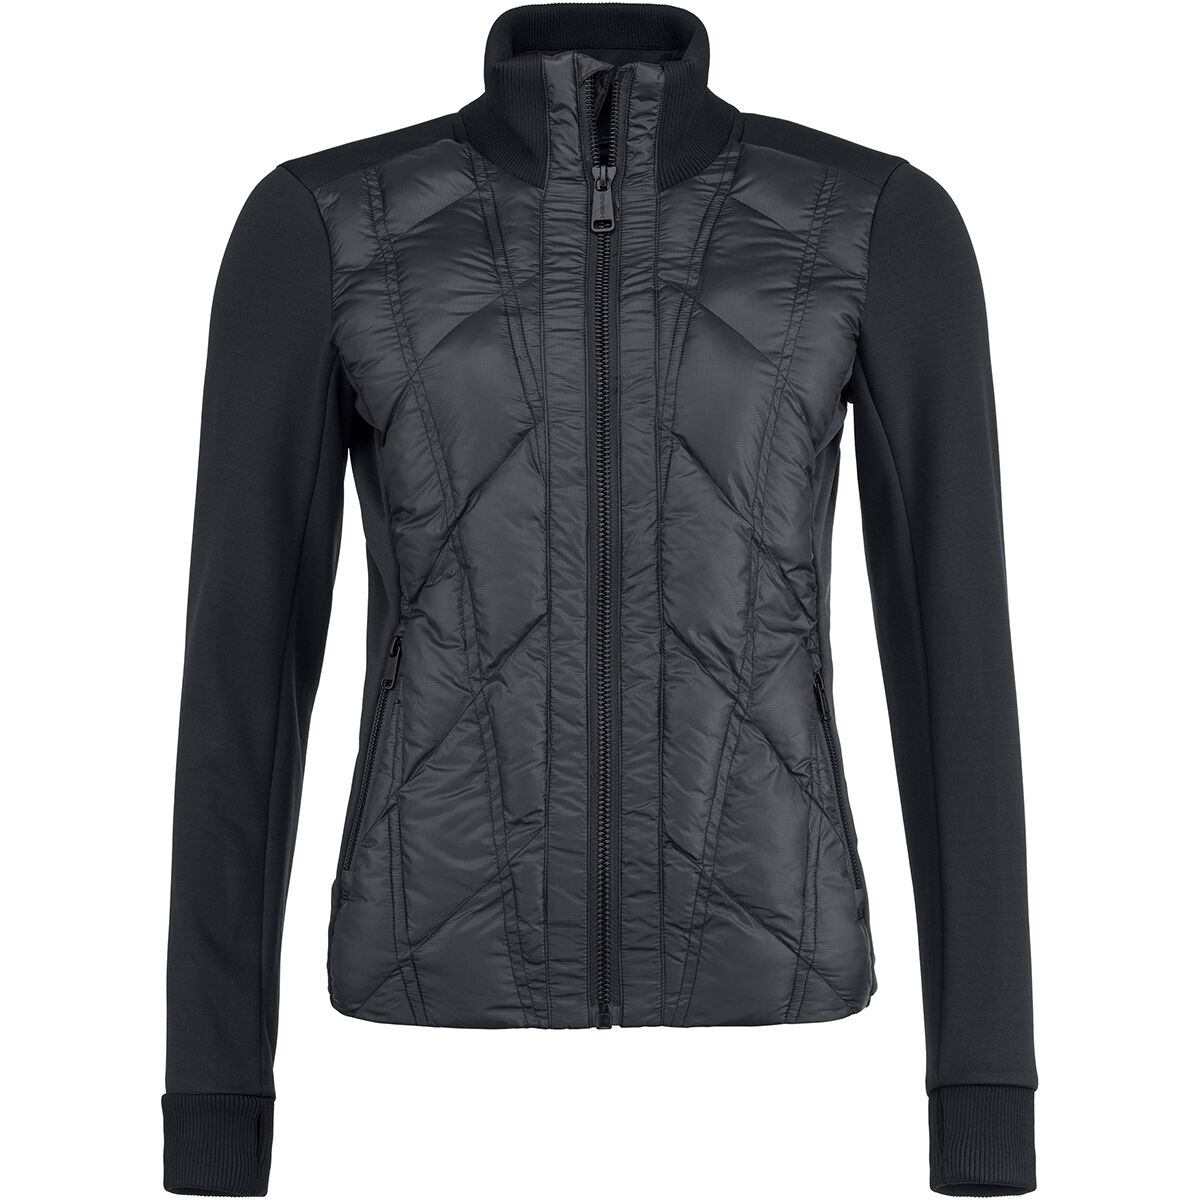 90 Degree By Reflex, Jackets & Coats, 9 Degree By Reflex Quilted Zip Up  Jacket